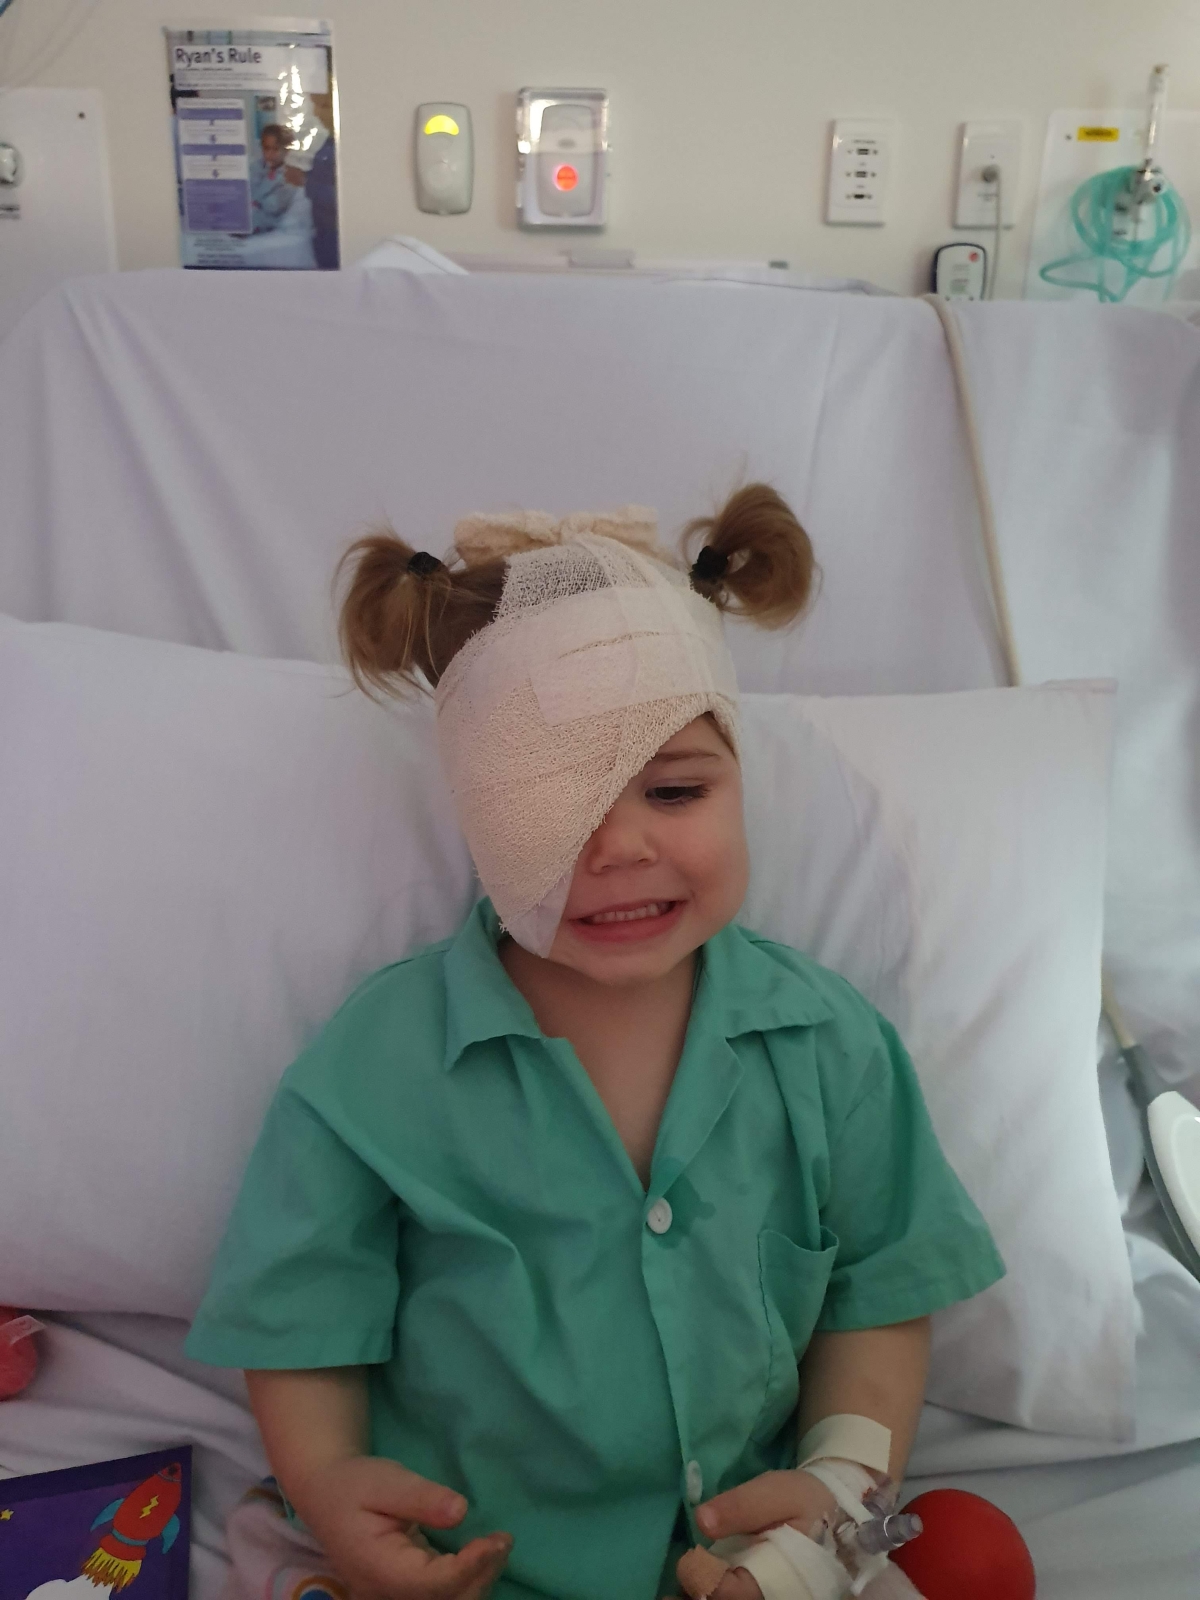 Thea with head bandaged